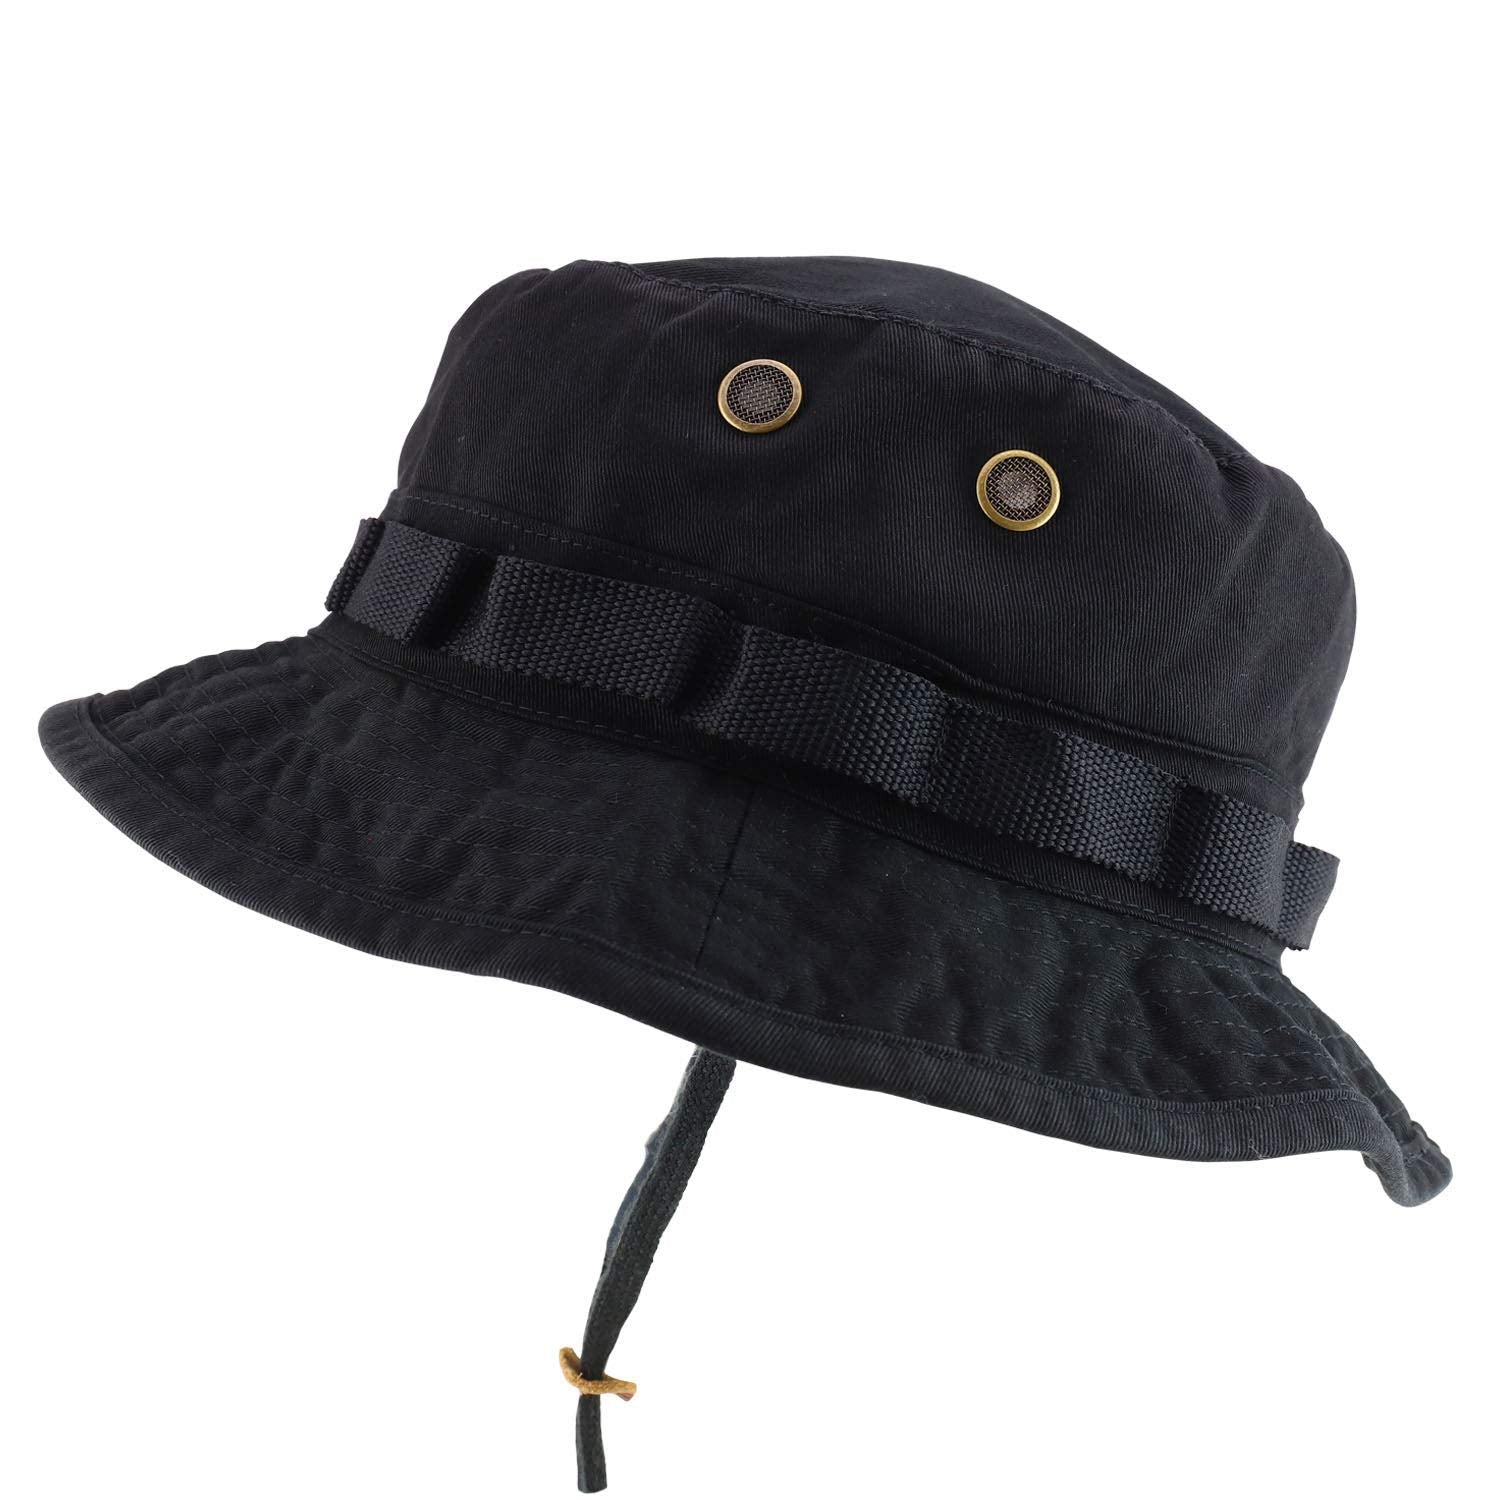 Consigned Unisex Kinsey Boonie Hat - Black Cotton - One Size